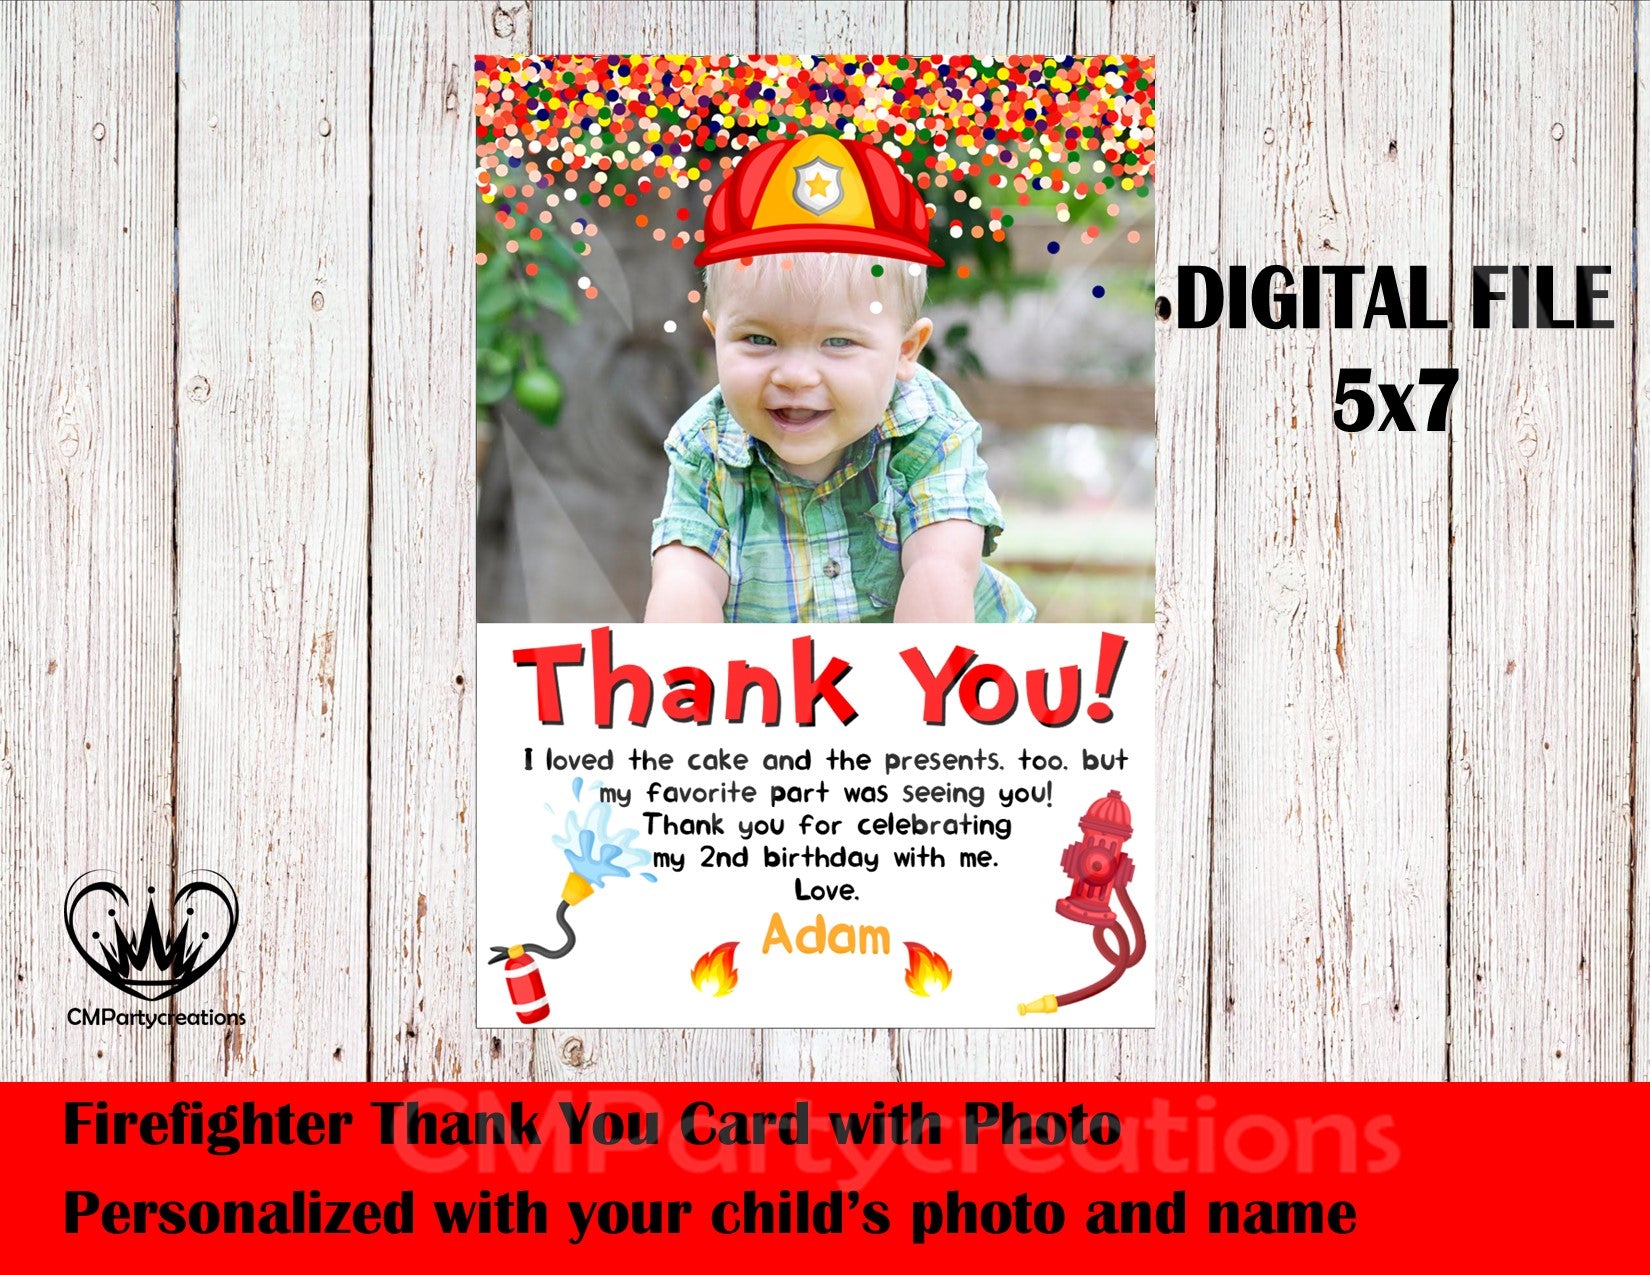 firefighter-thank-you-card-with-photo-cmpartycreations